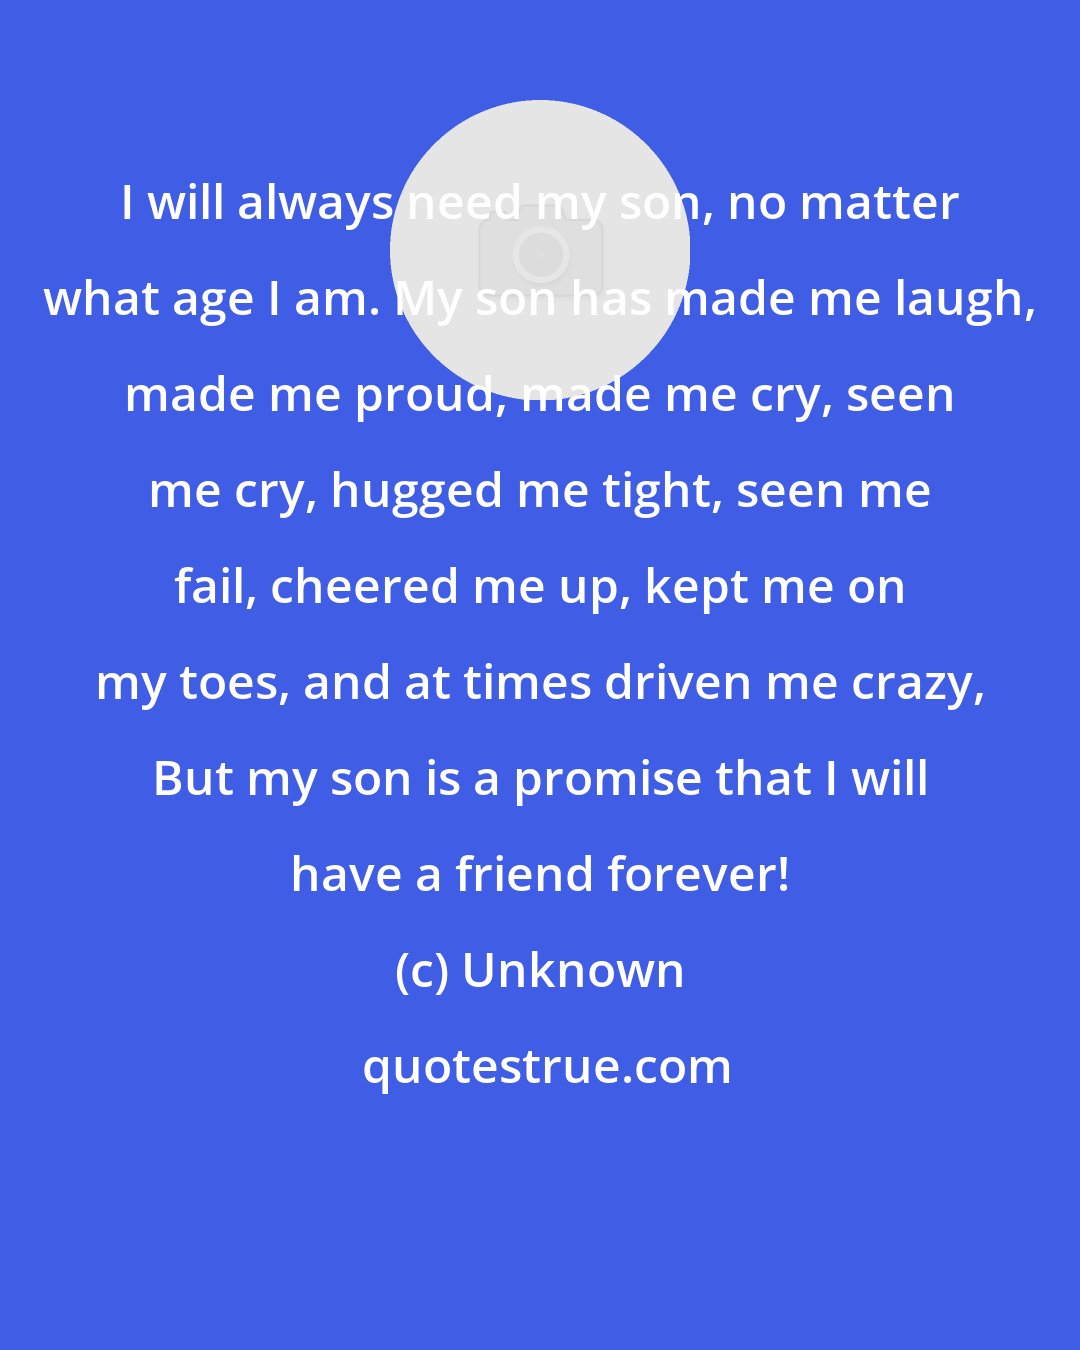 Unknown: I will always need my son, no matter what age I am. My son has made me laugh, made me proud, made me cry, seen me cry, hugged me tight, seen me fail, cheered me up, kept me on my toes, and at times driven me crazy, But my son is a promise that I will have a friend forever!